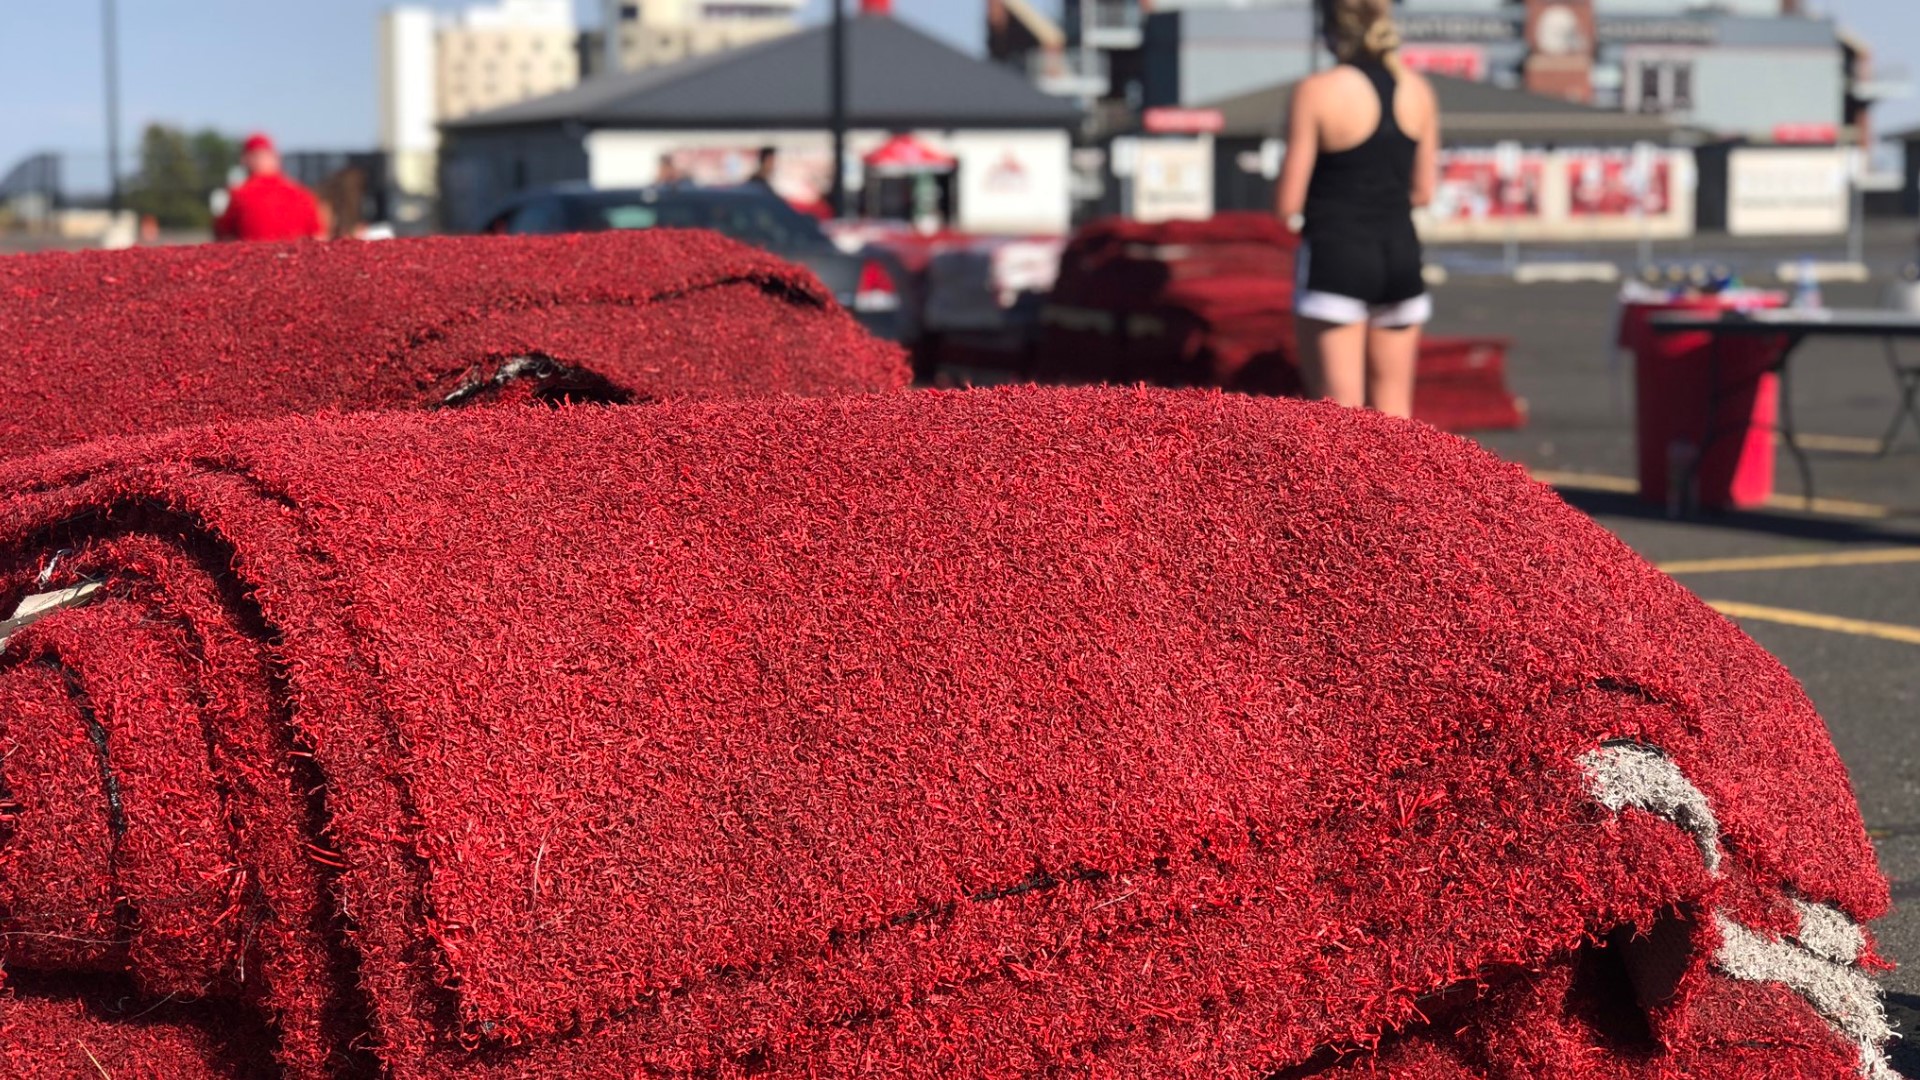 The school got new red turf this summer, so they decided to sell their old red turf to their fans.